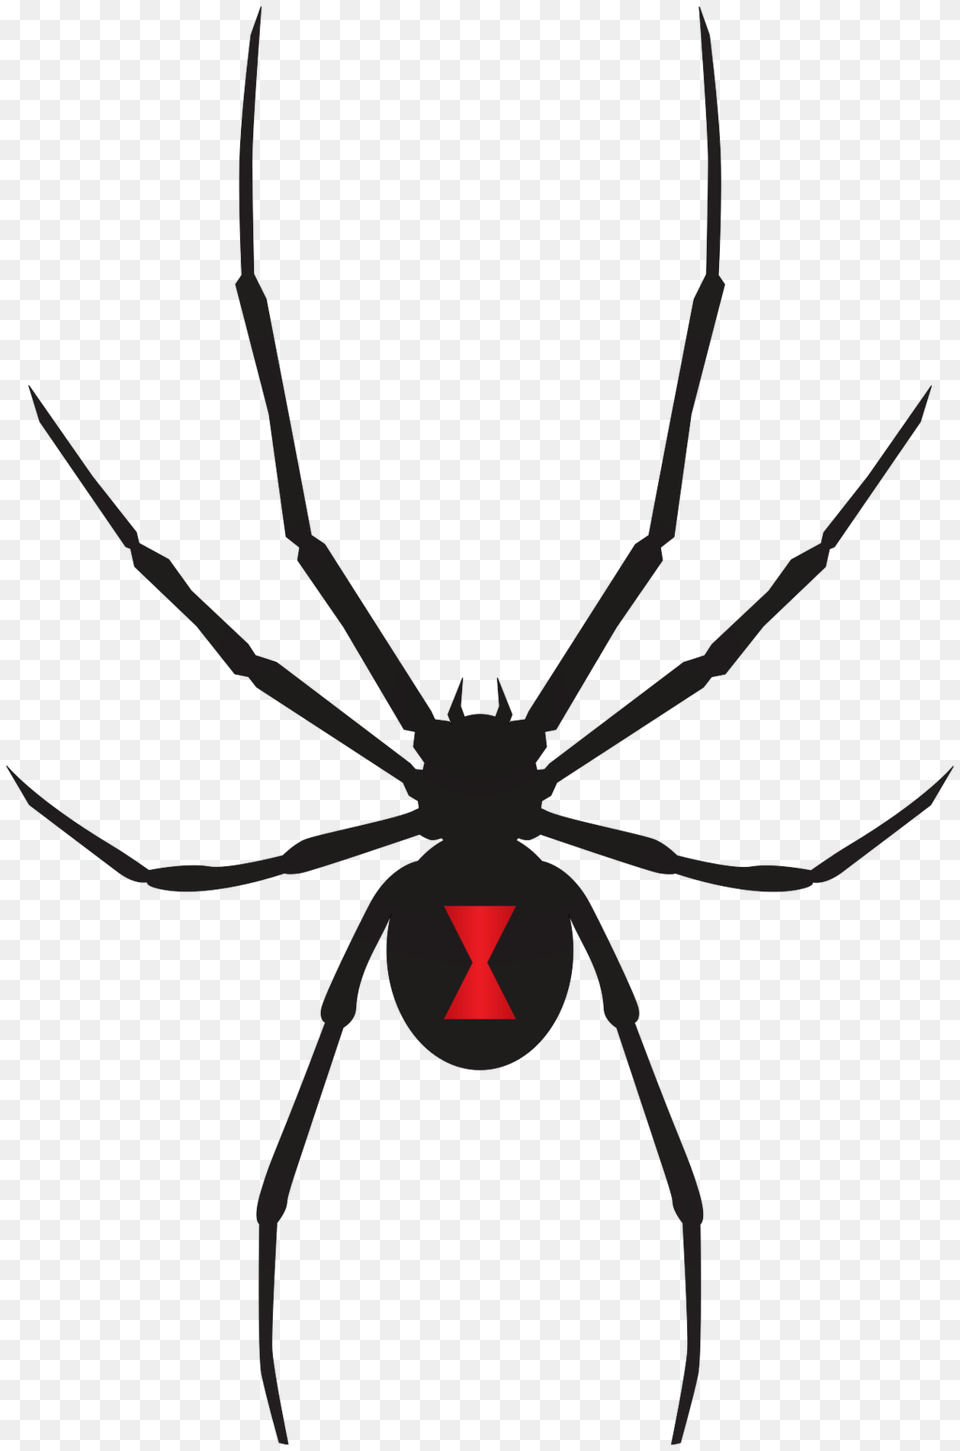 Black Widow Spider Clip Art, Animal, Invertebrate, Black Widow, Insect Png Image